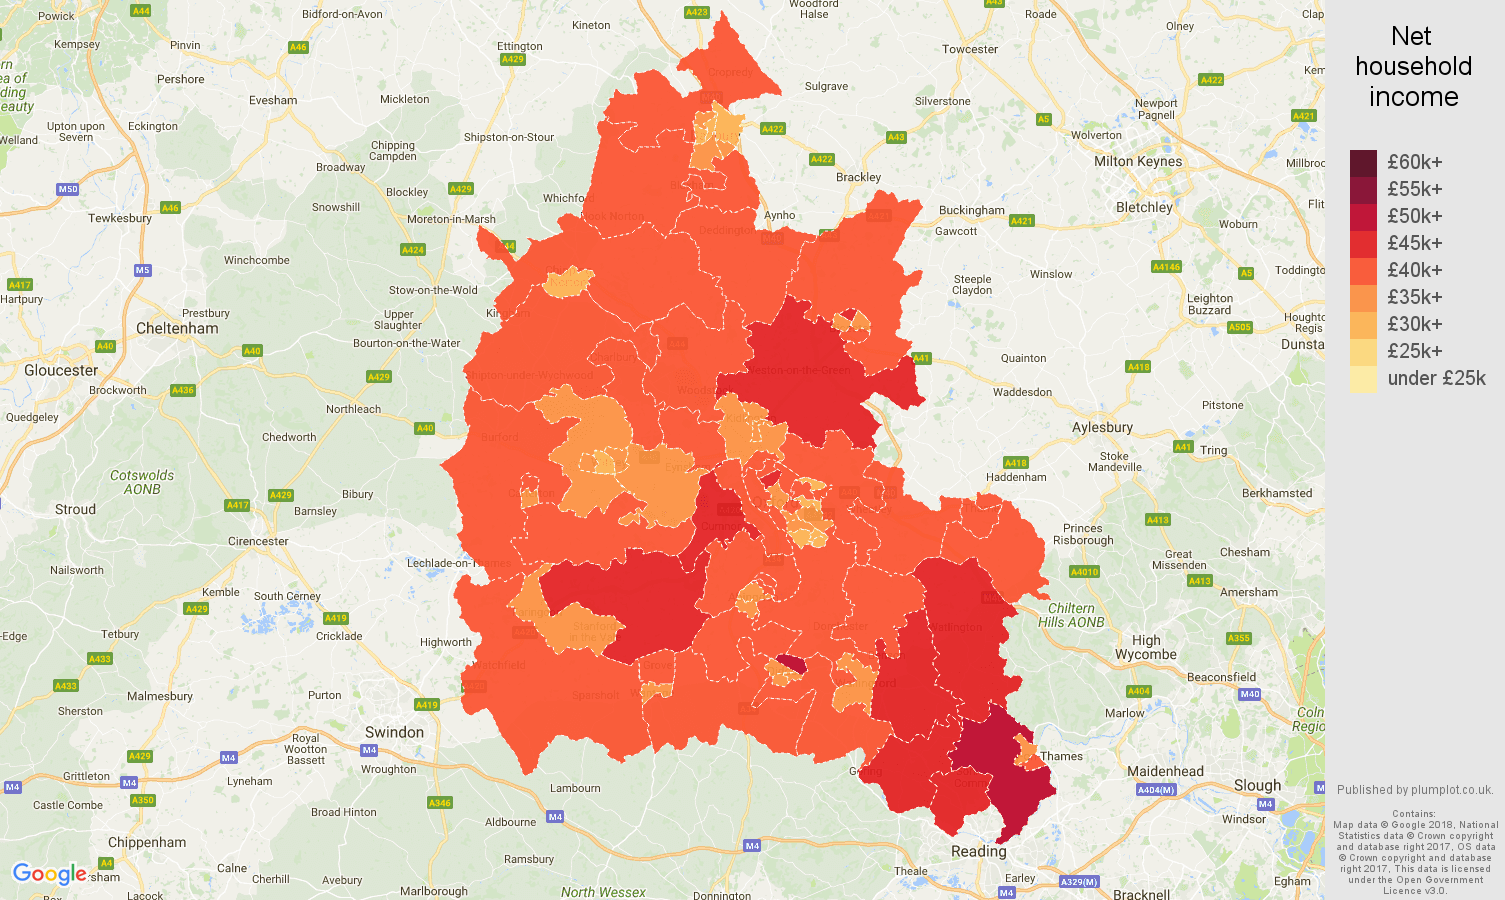 Oxfordshire net household income map